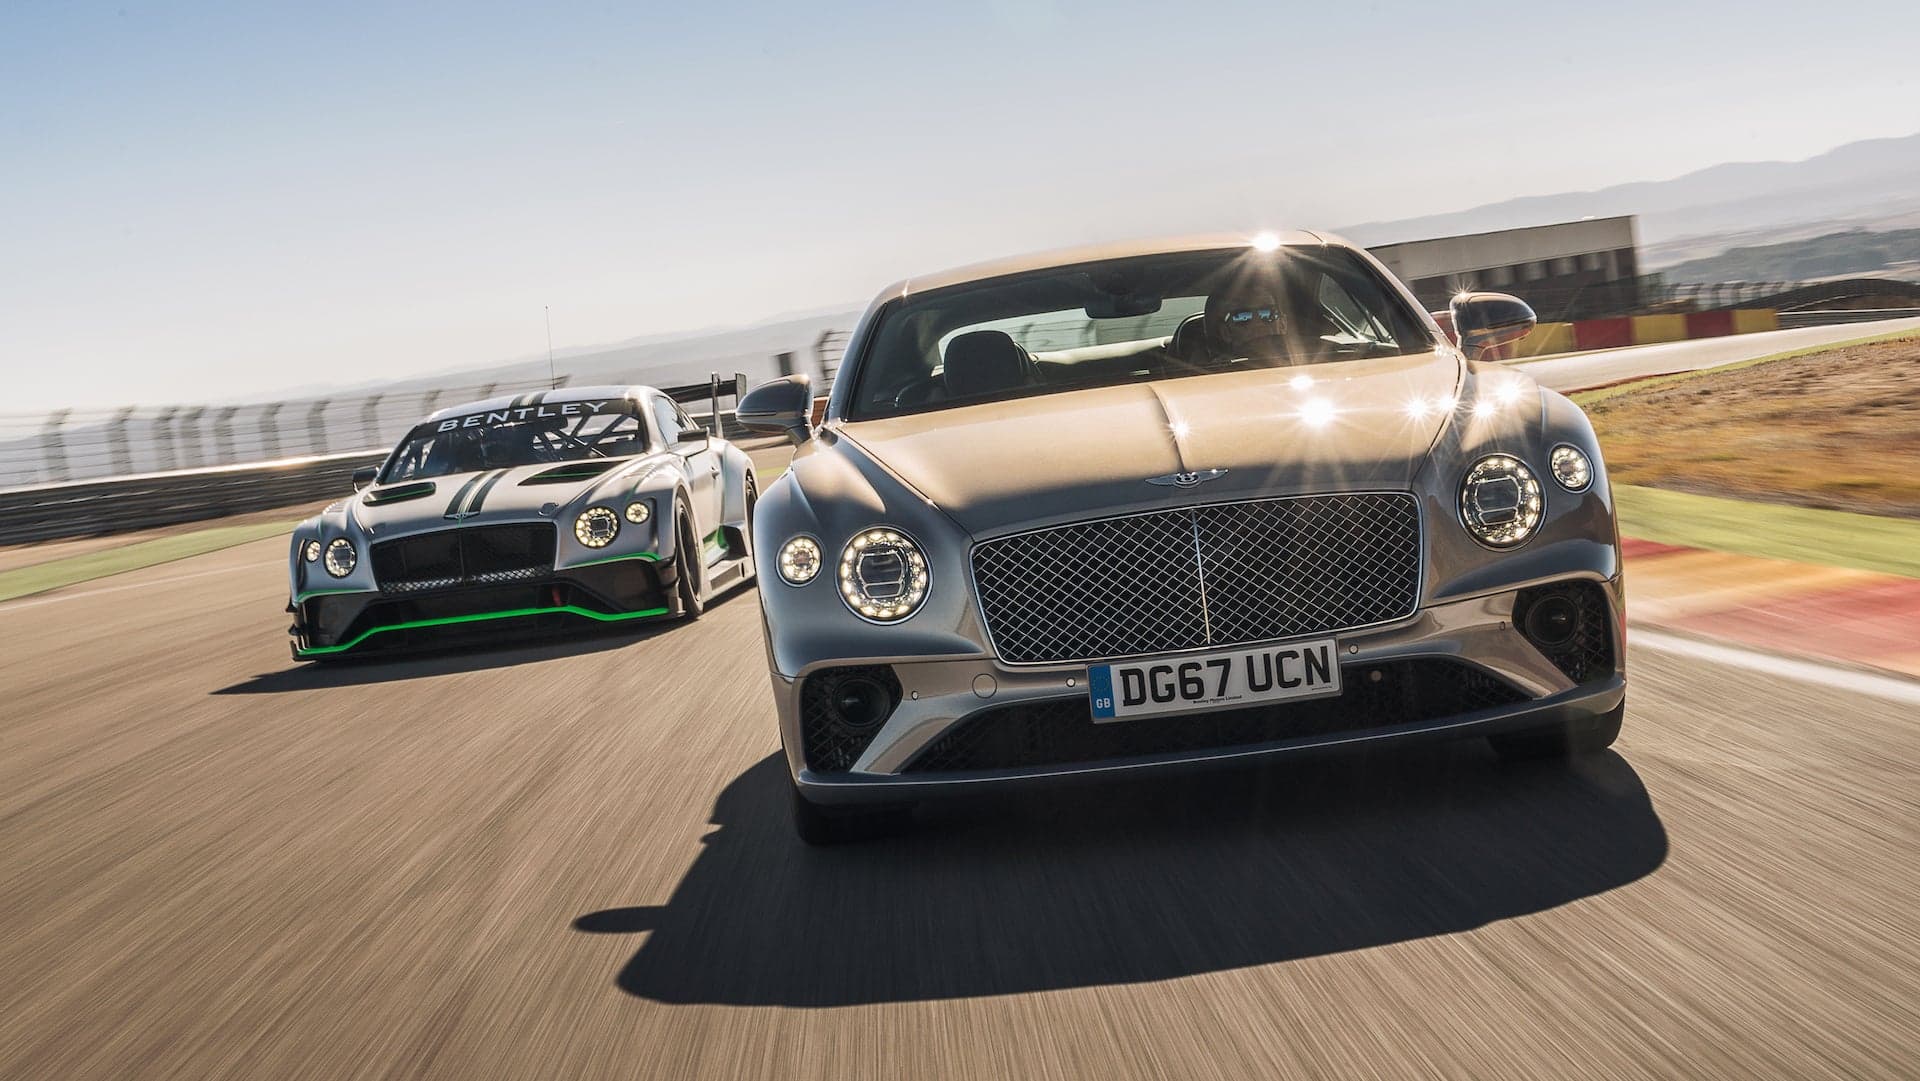 Bentley Continental GT Will Chase the Pikes Peak Production Car Record in 2019